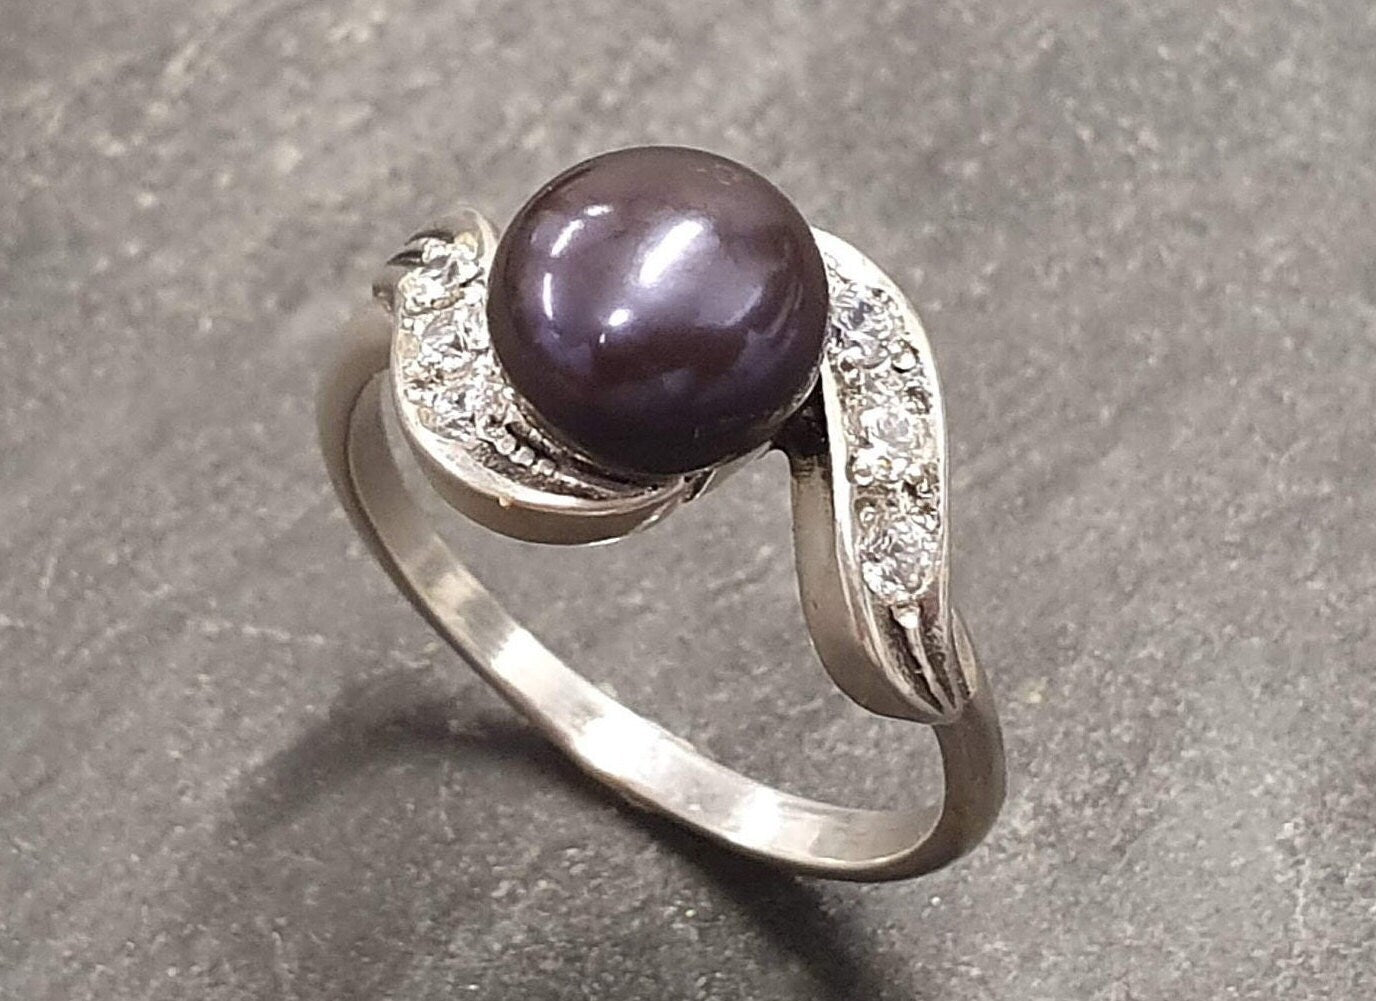 Black Pearl Ring, Natural Pearl, Pearl Ring, June Birthstone, Antique Pearl Ring, Vintage Pearl Ring, June Ring, Solid Silver Ring, Pearl